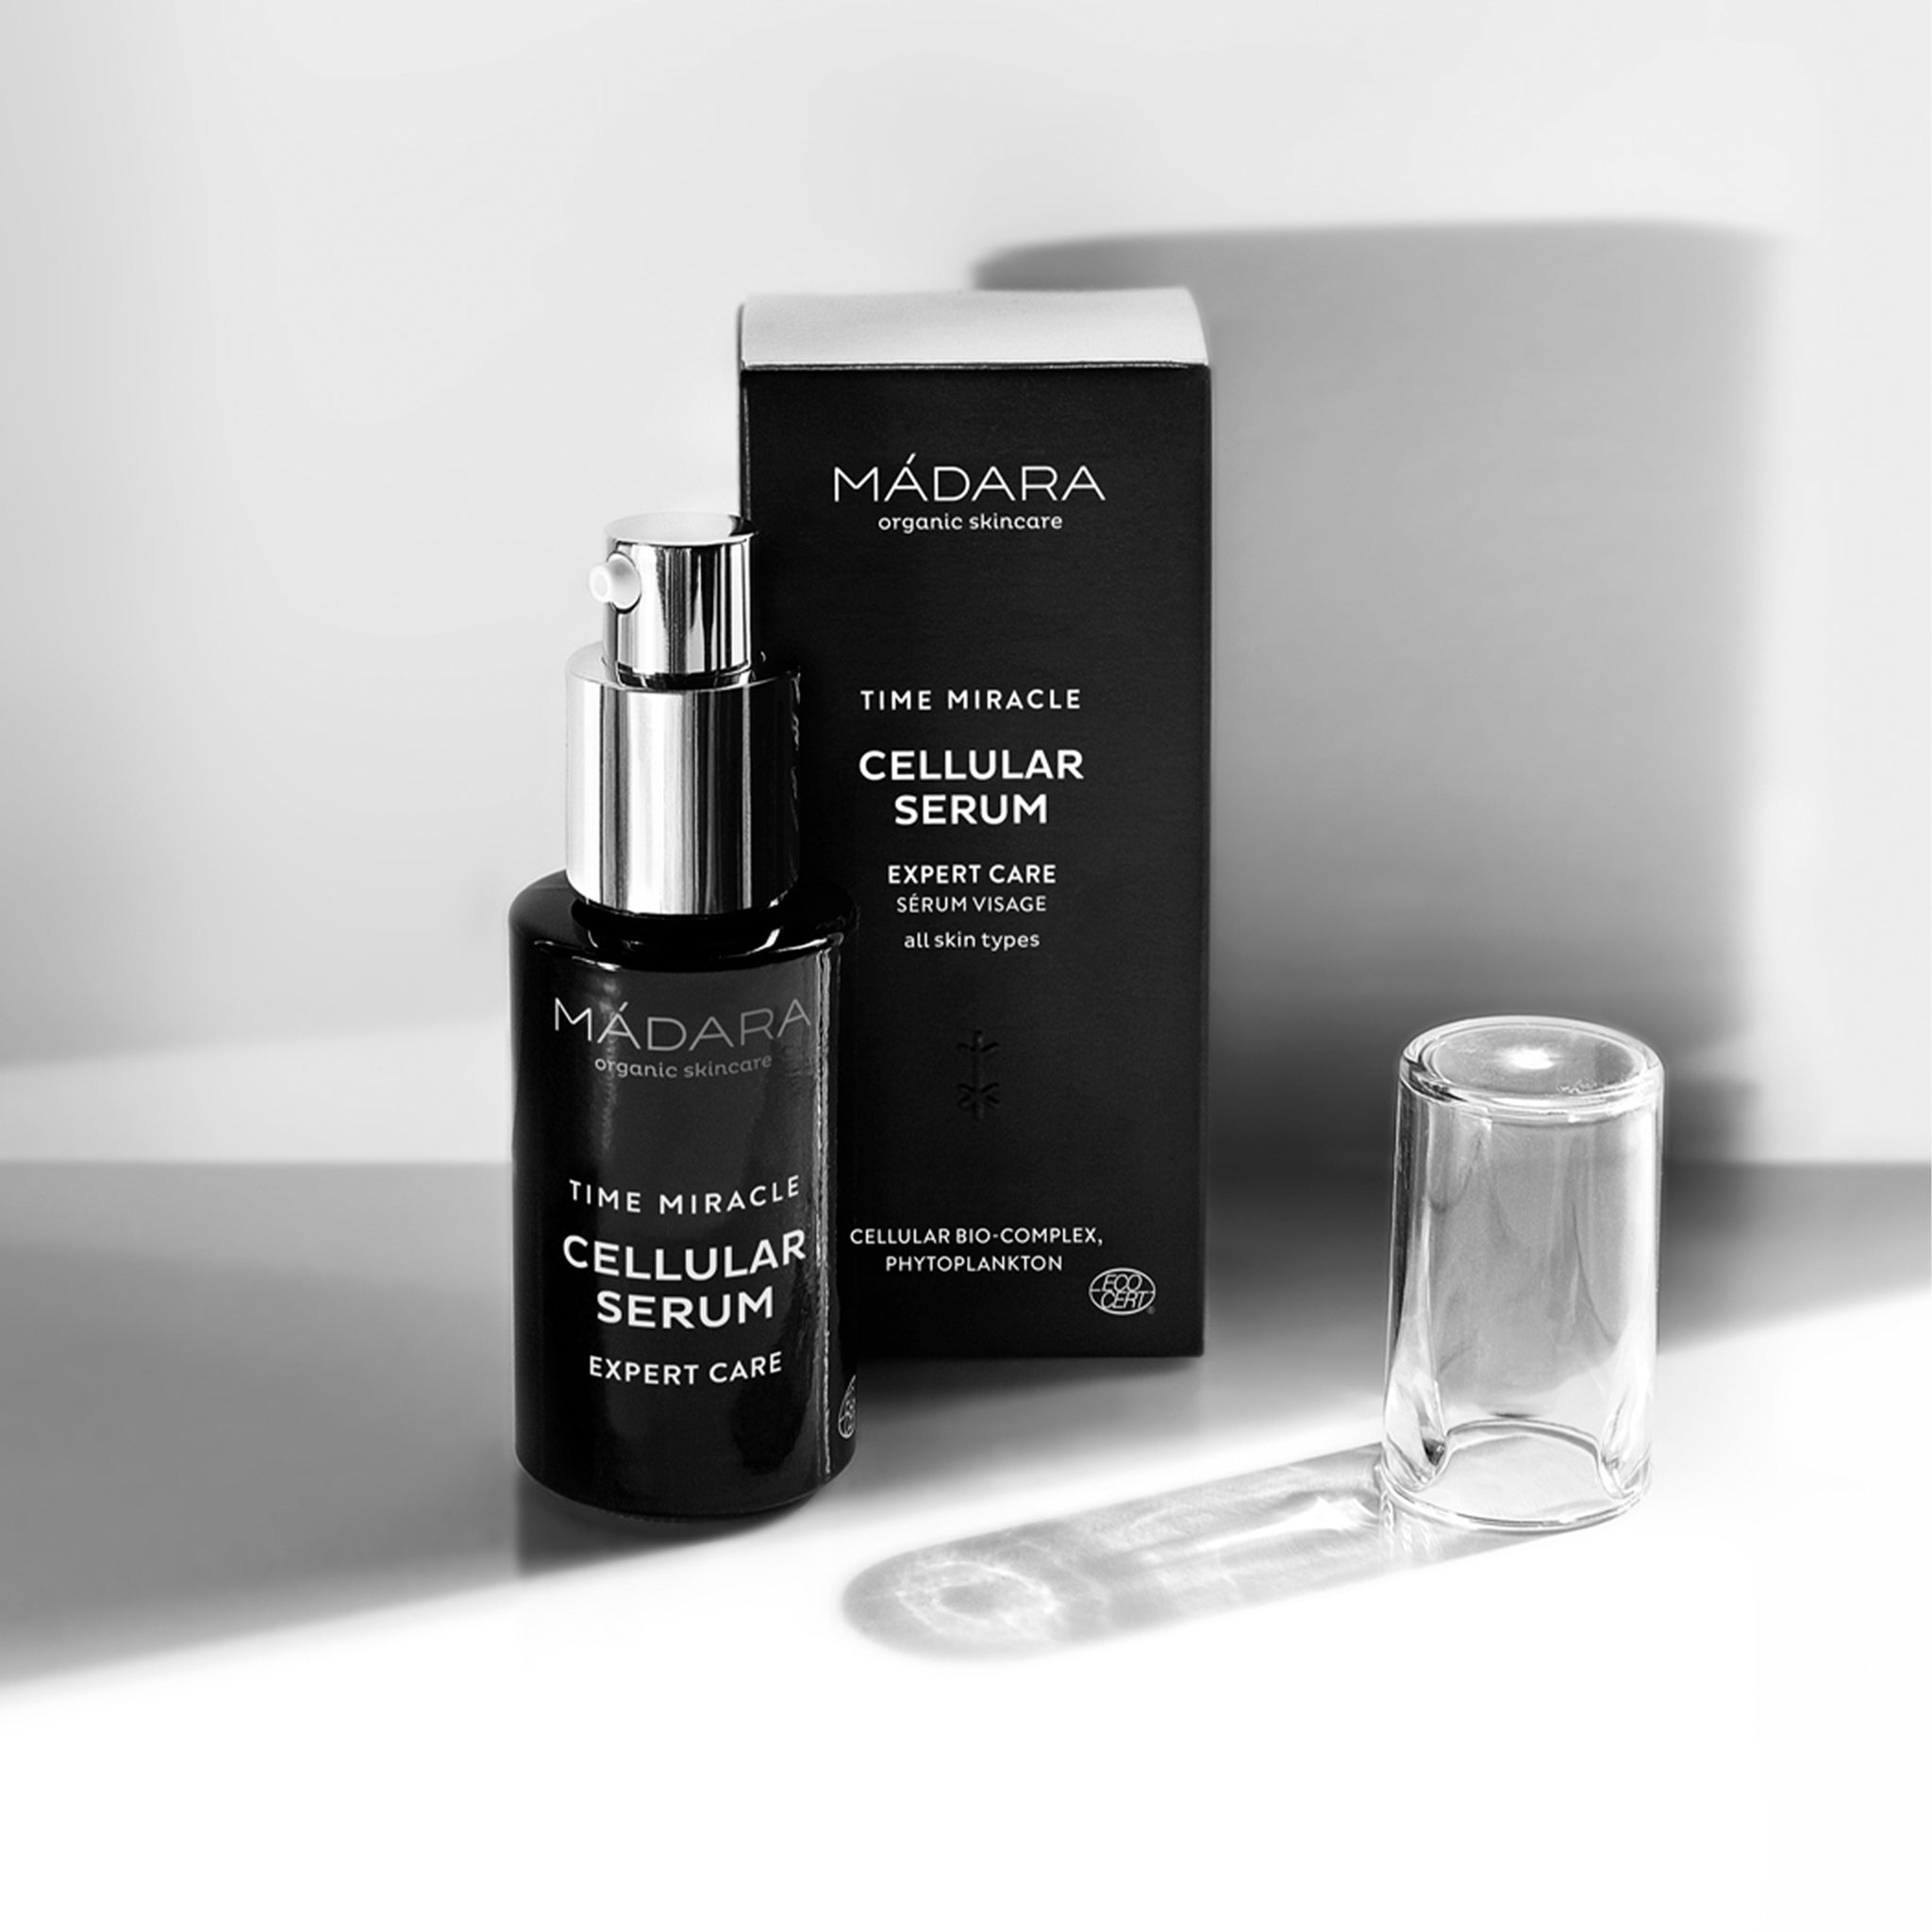 Time Miracle Cellular Serum - mypure.co.uk